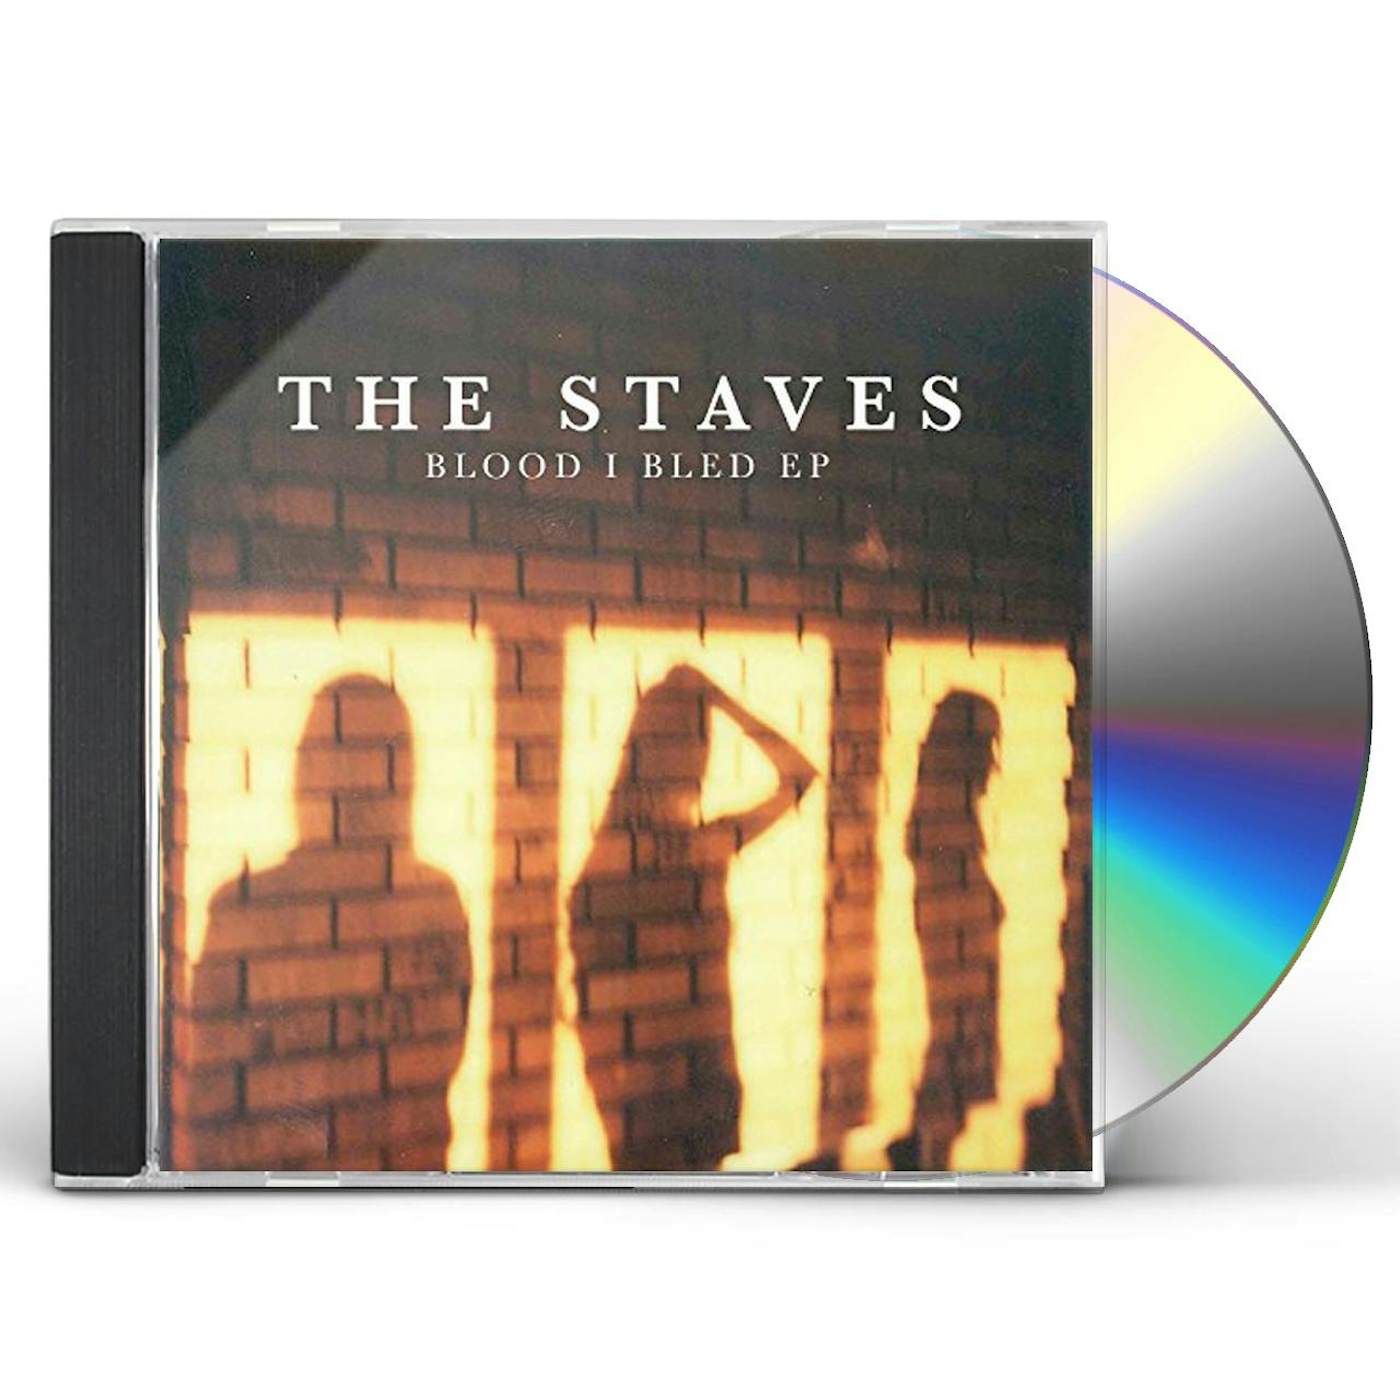 The Staves BLOOD I BLED CD